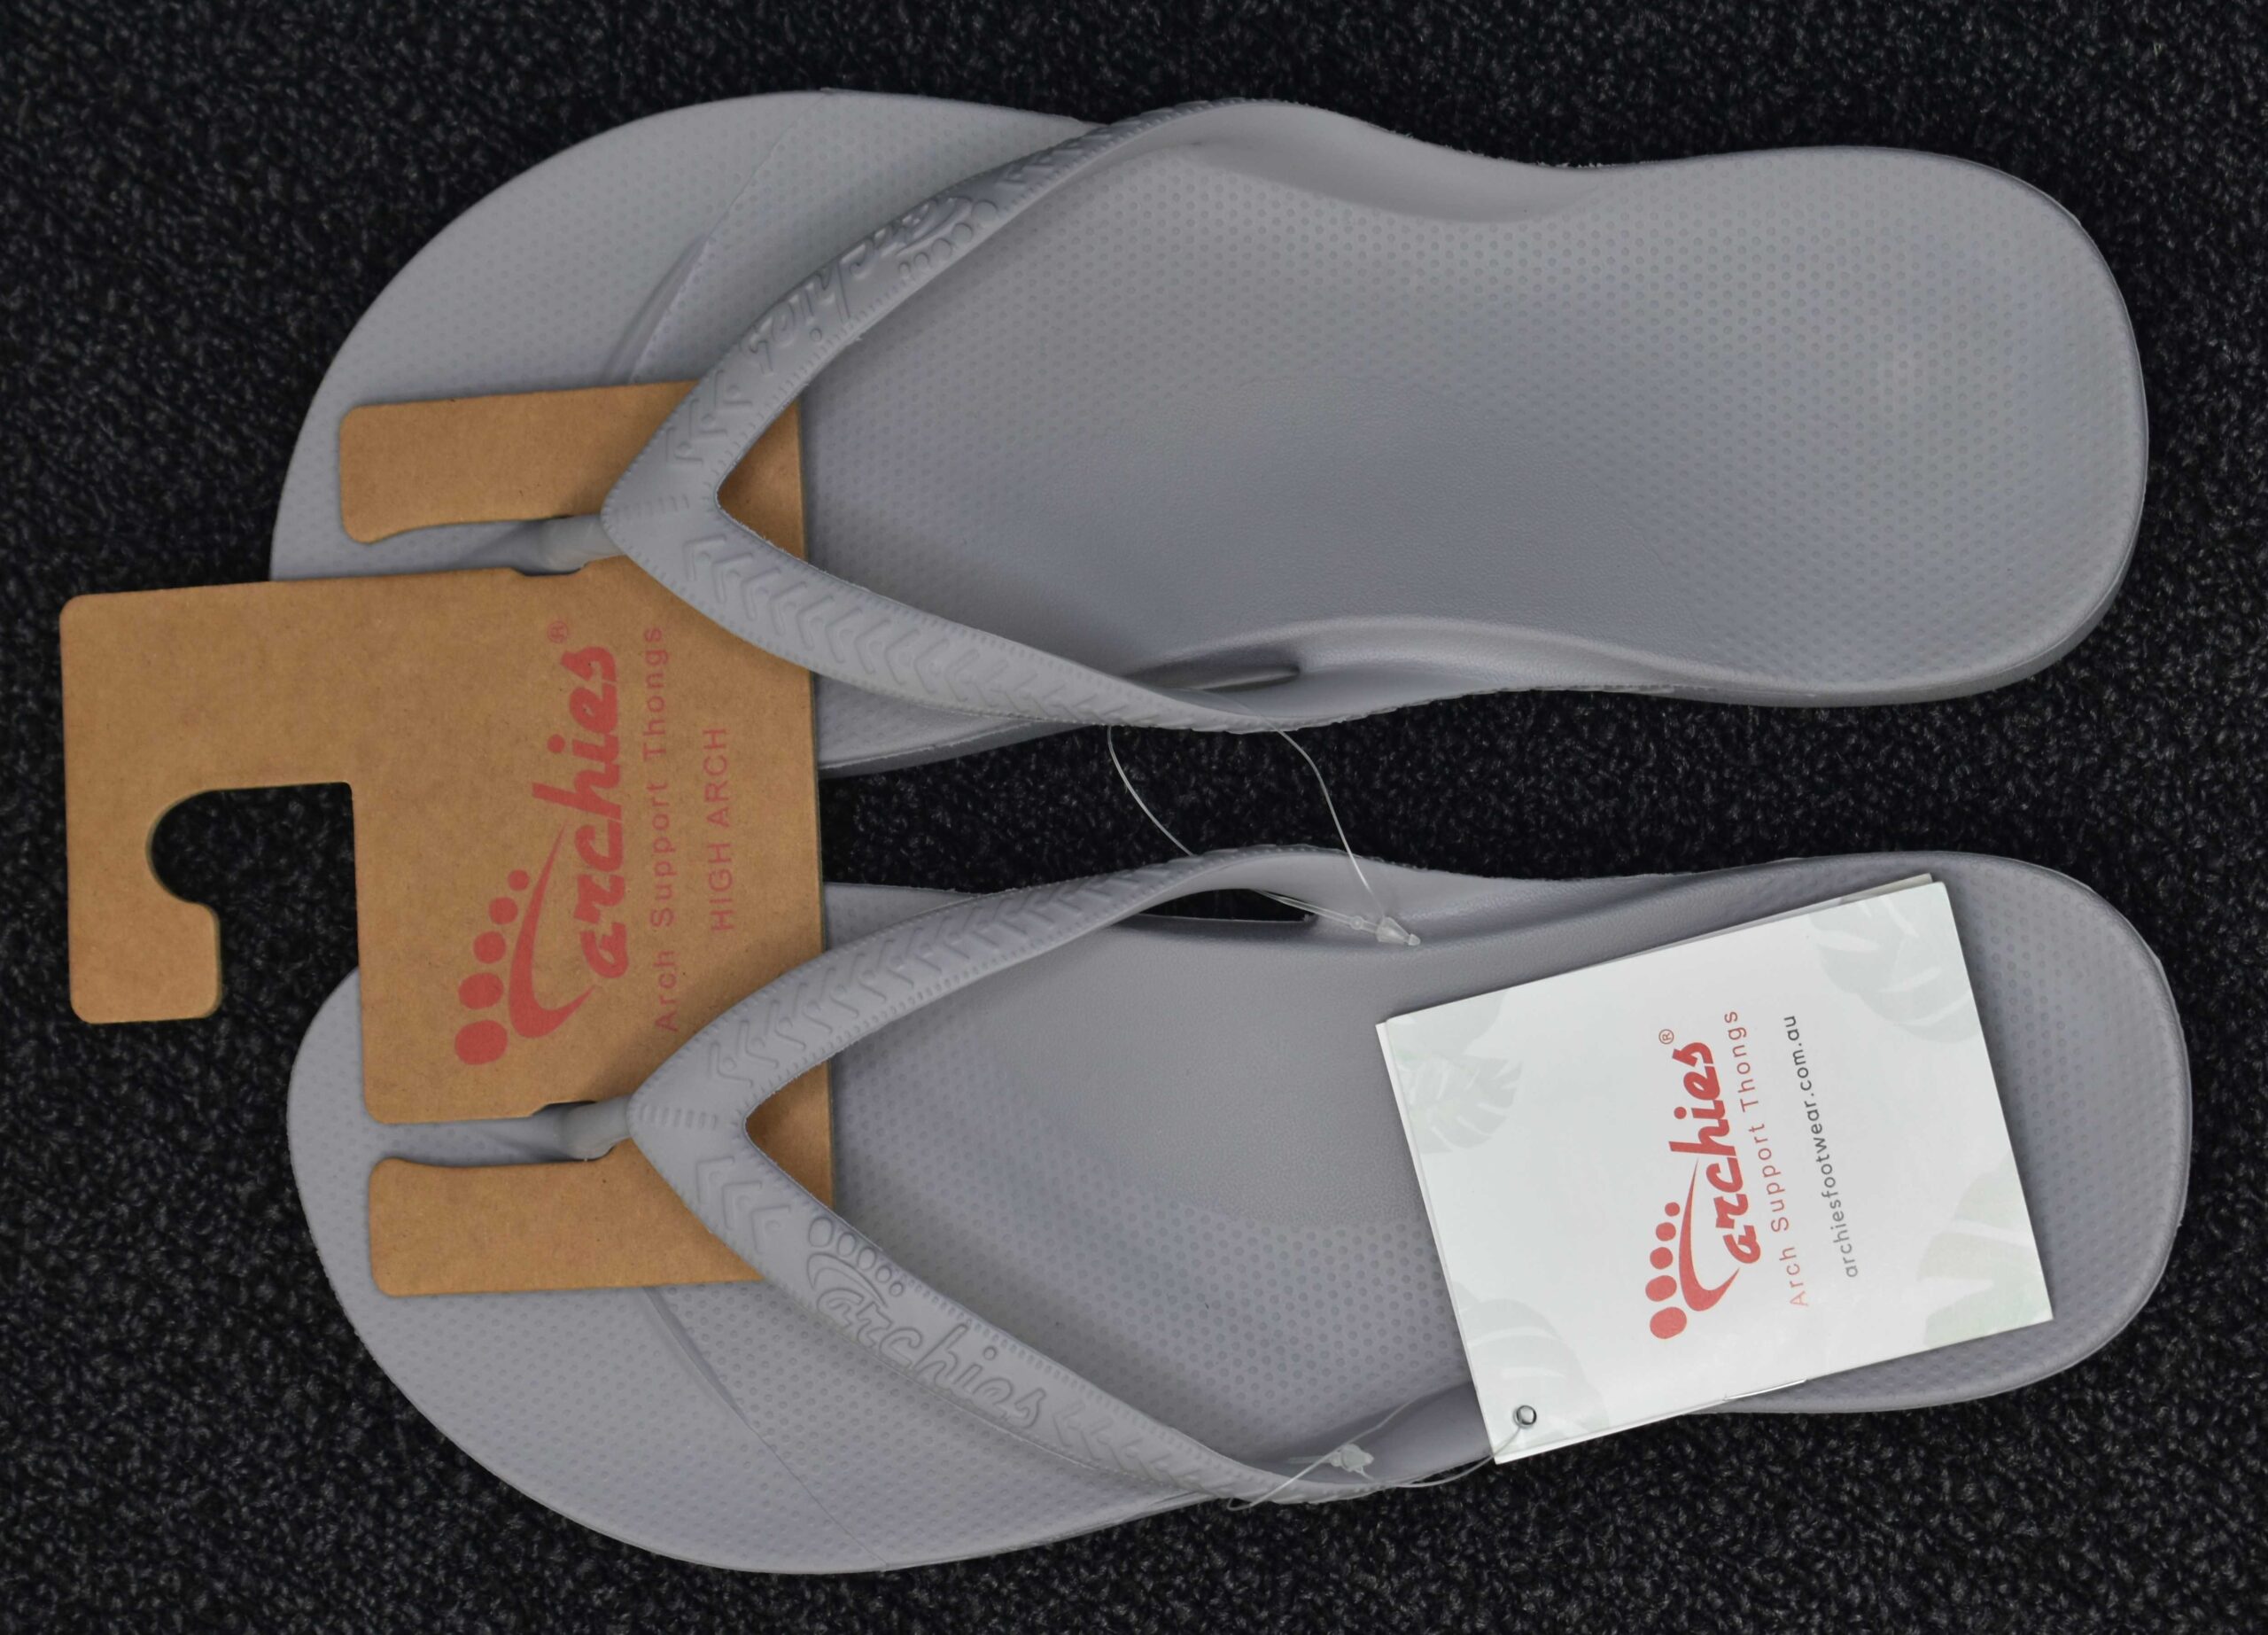 Archies Flip Flops Taupe